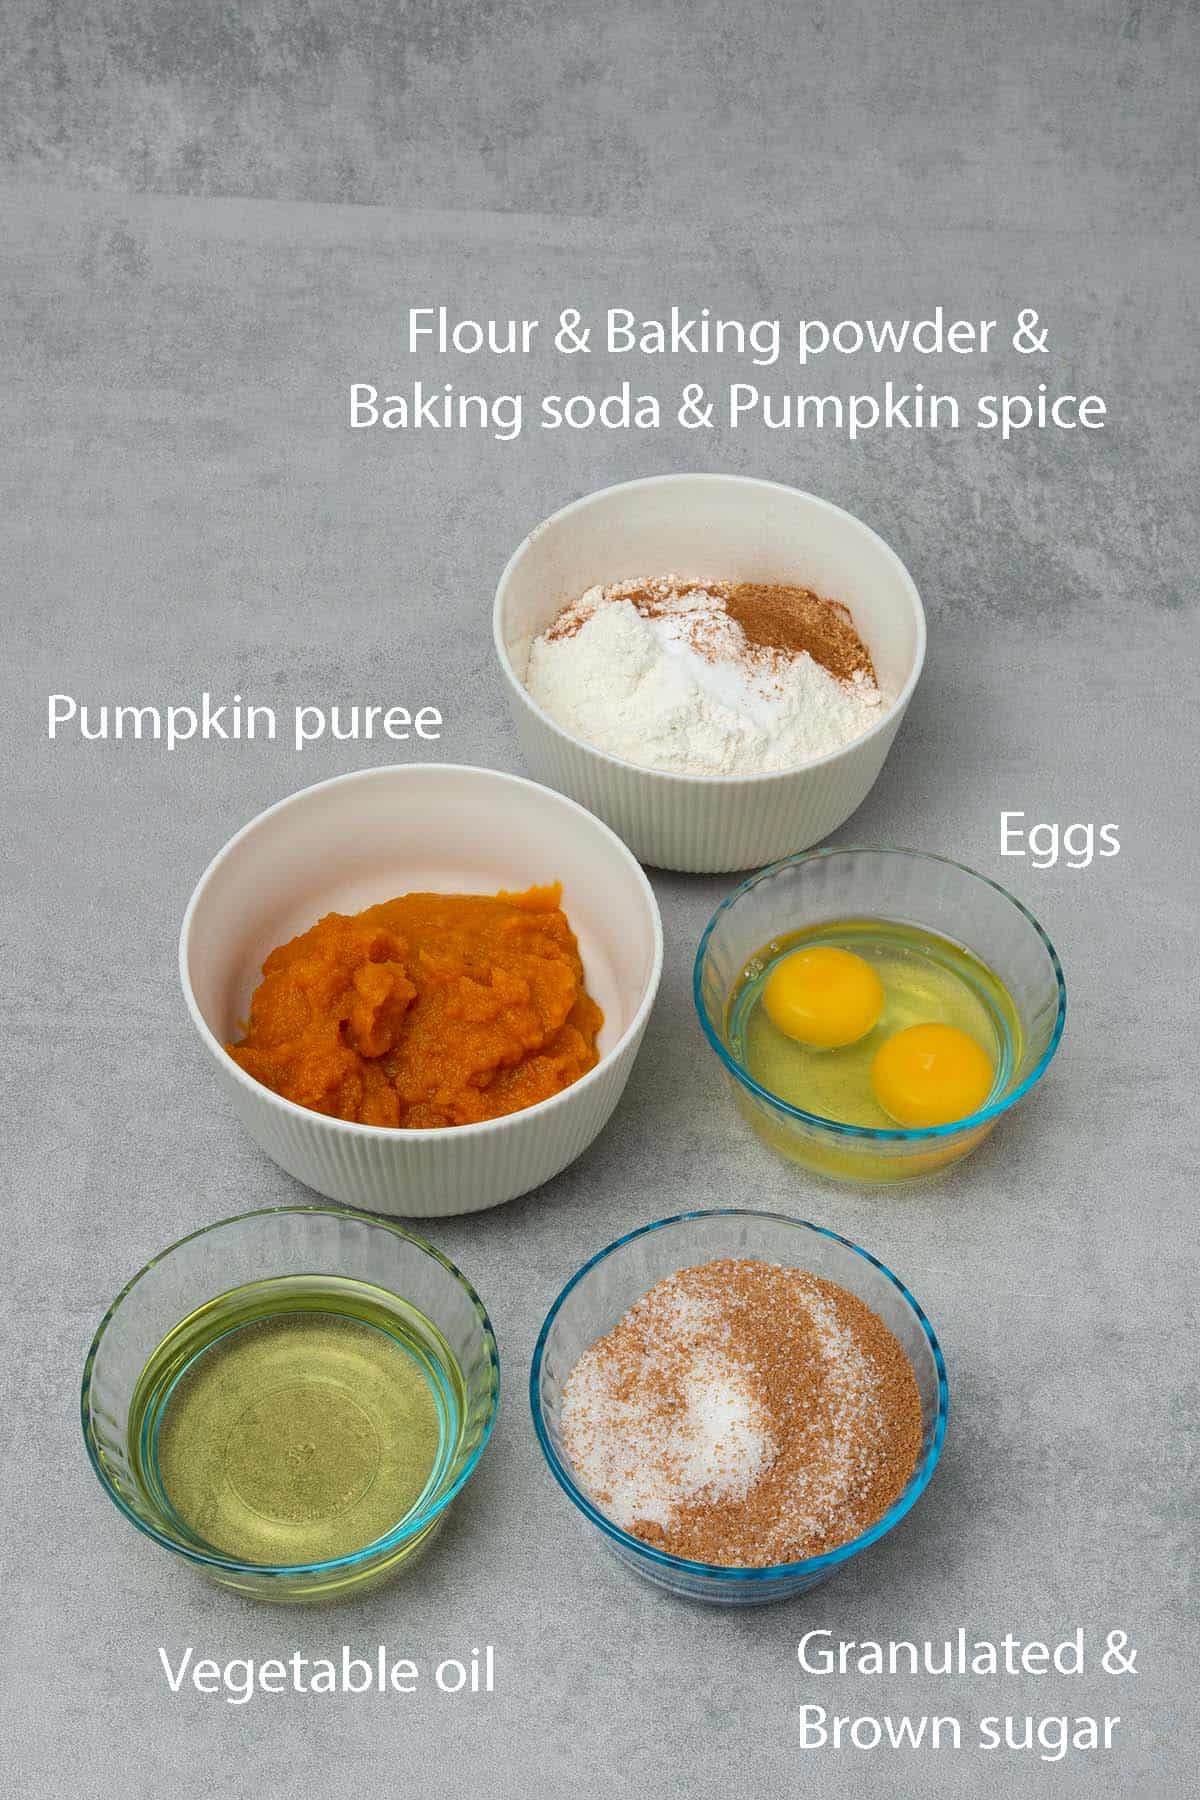 Pumpkin bread with cream cheese frosting ingredients.